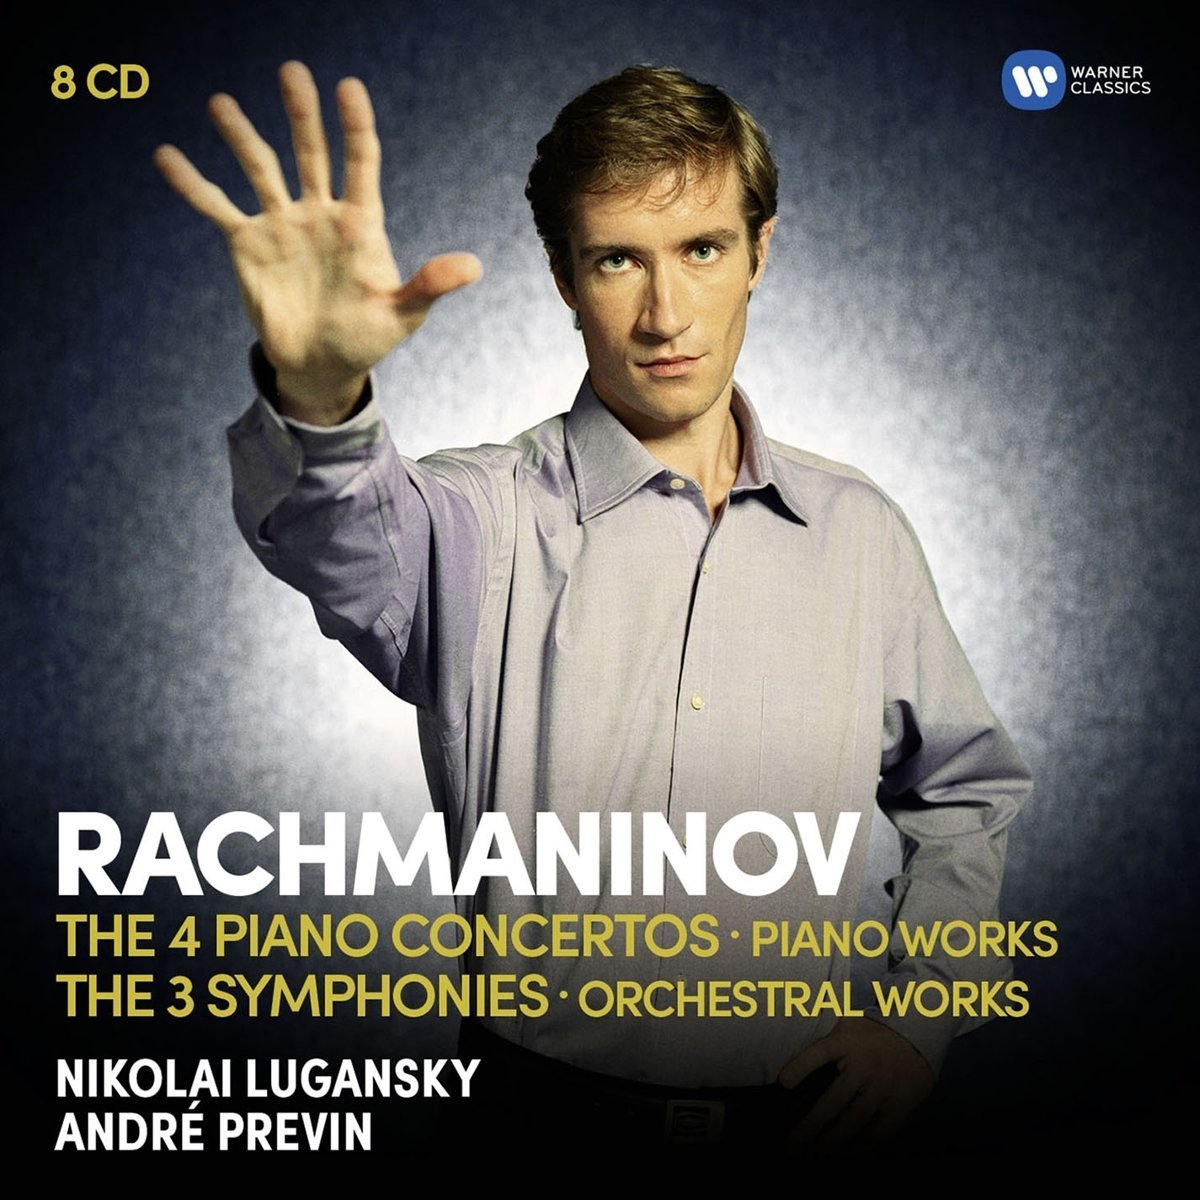 Rachmaninov: The Piano Concertos, The Symphonies, Rhapsody on a theme by Paganini, Variations, Préludes, Moments musicaux